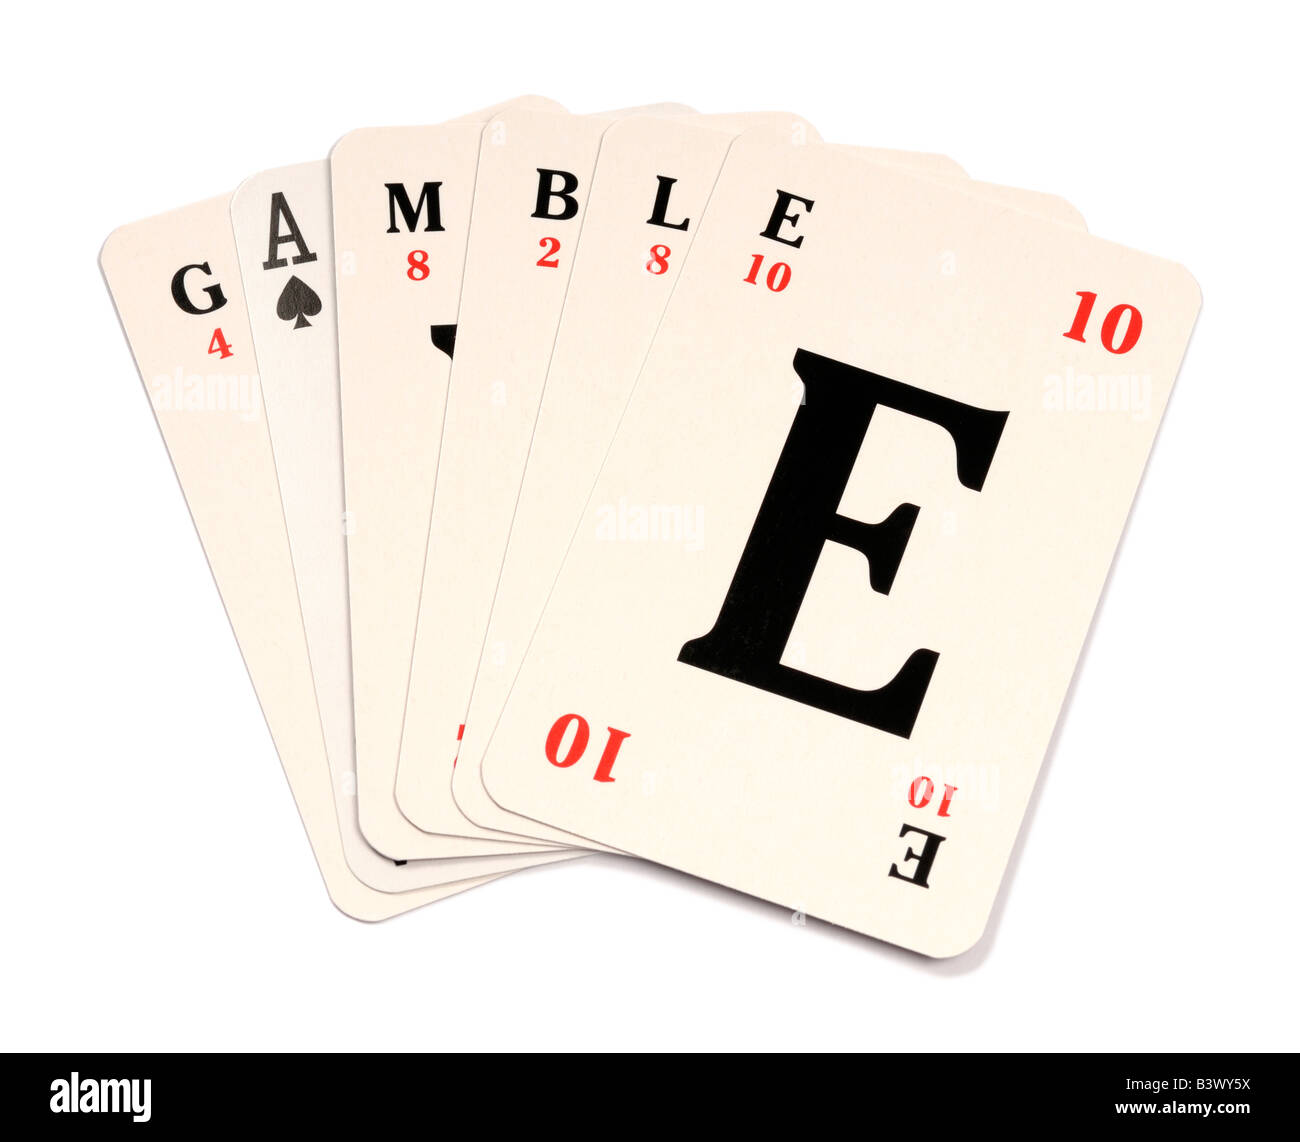 Gamble playing cards Stock Photo